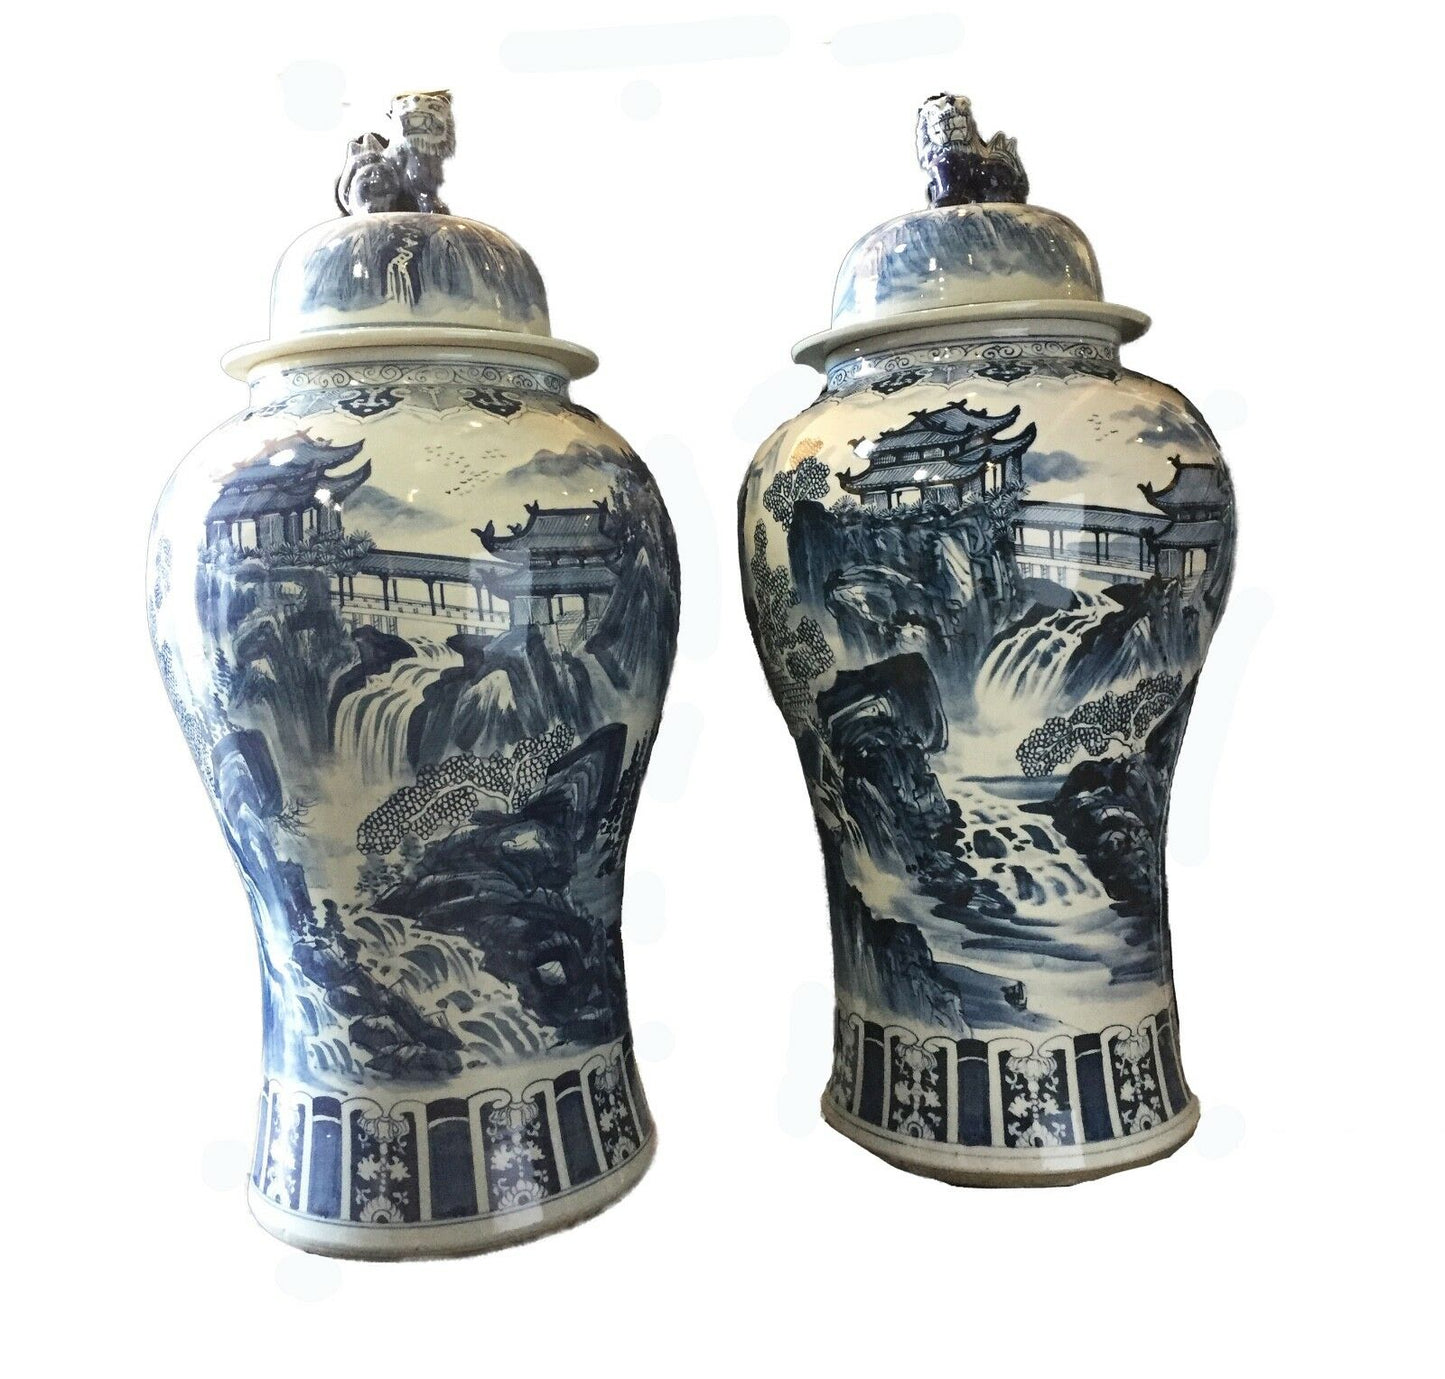 #917 Mansion Size Chinoiserie B & W Porcelain Ginger Jars - a Pair 47" H